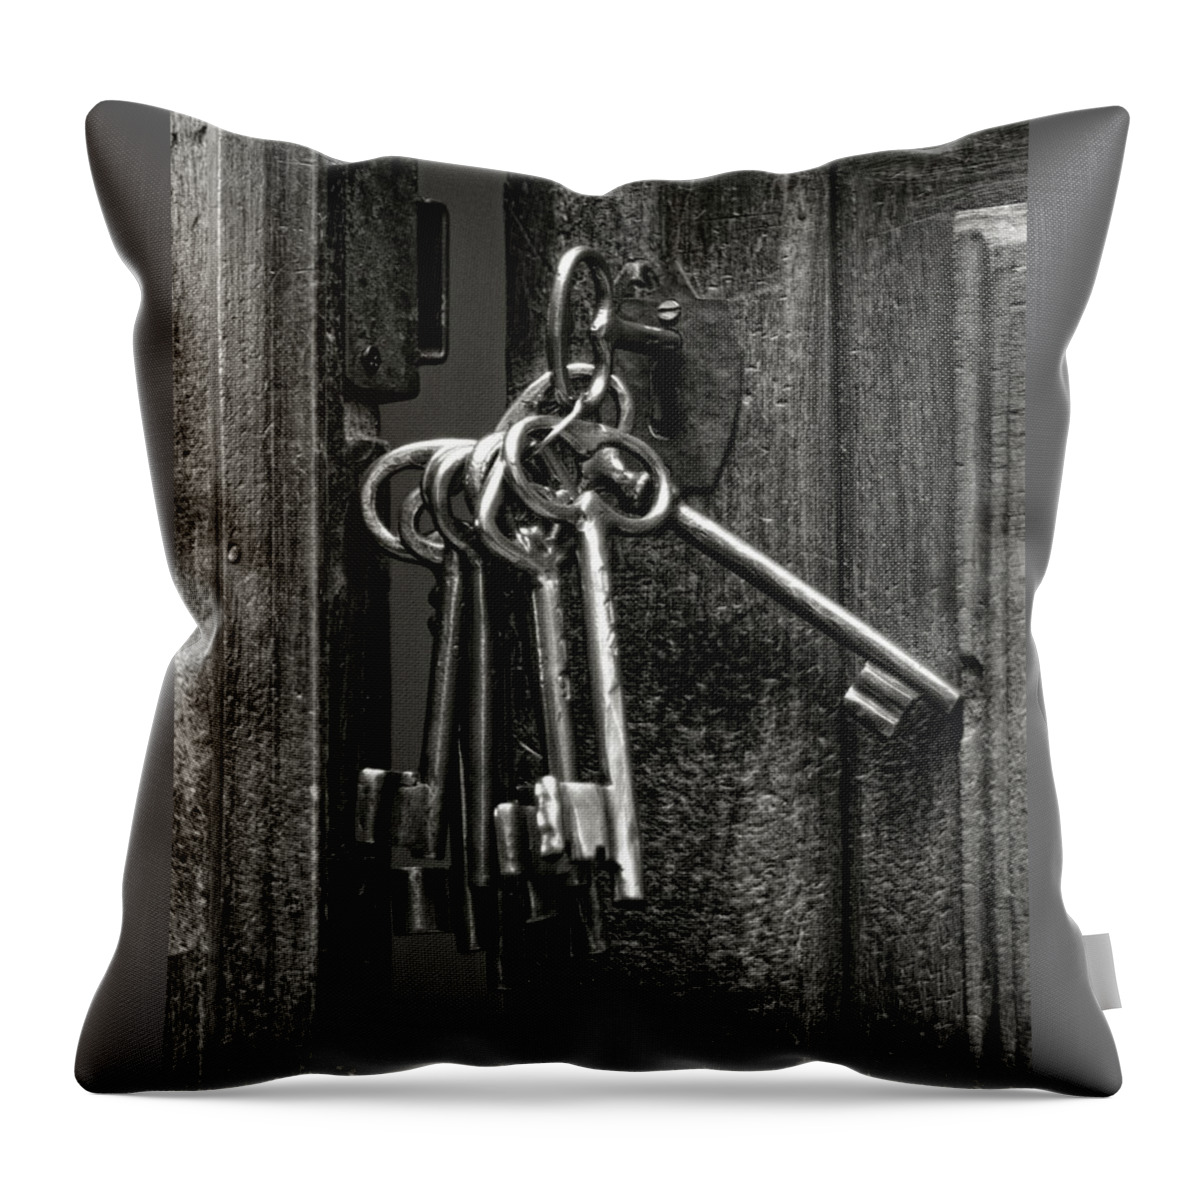 Door Throw Pillow featuring the photograph Unlocked - Keys and Opened Door by Mitch Spence